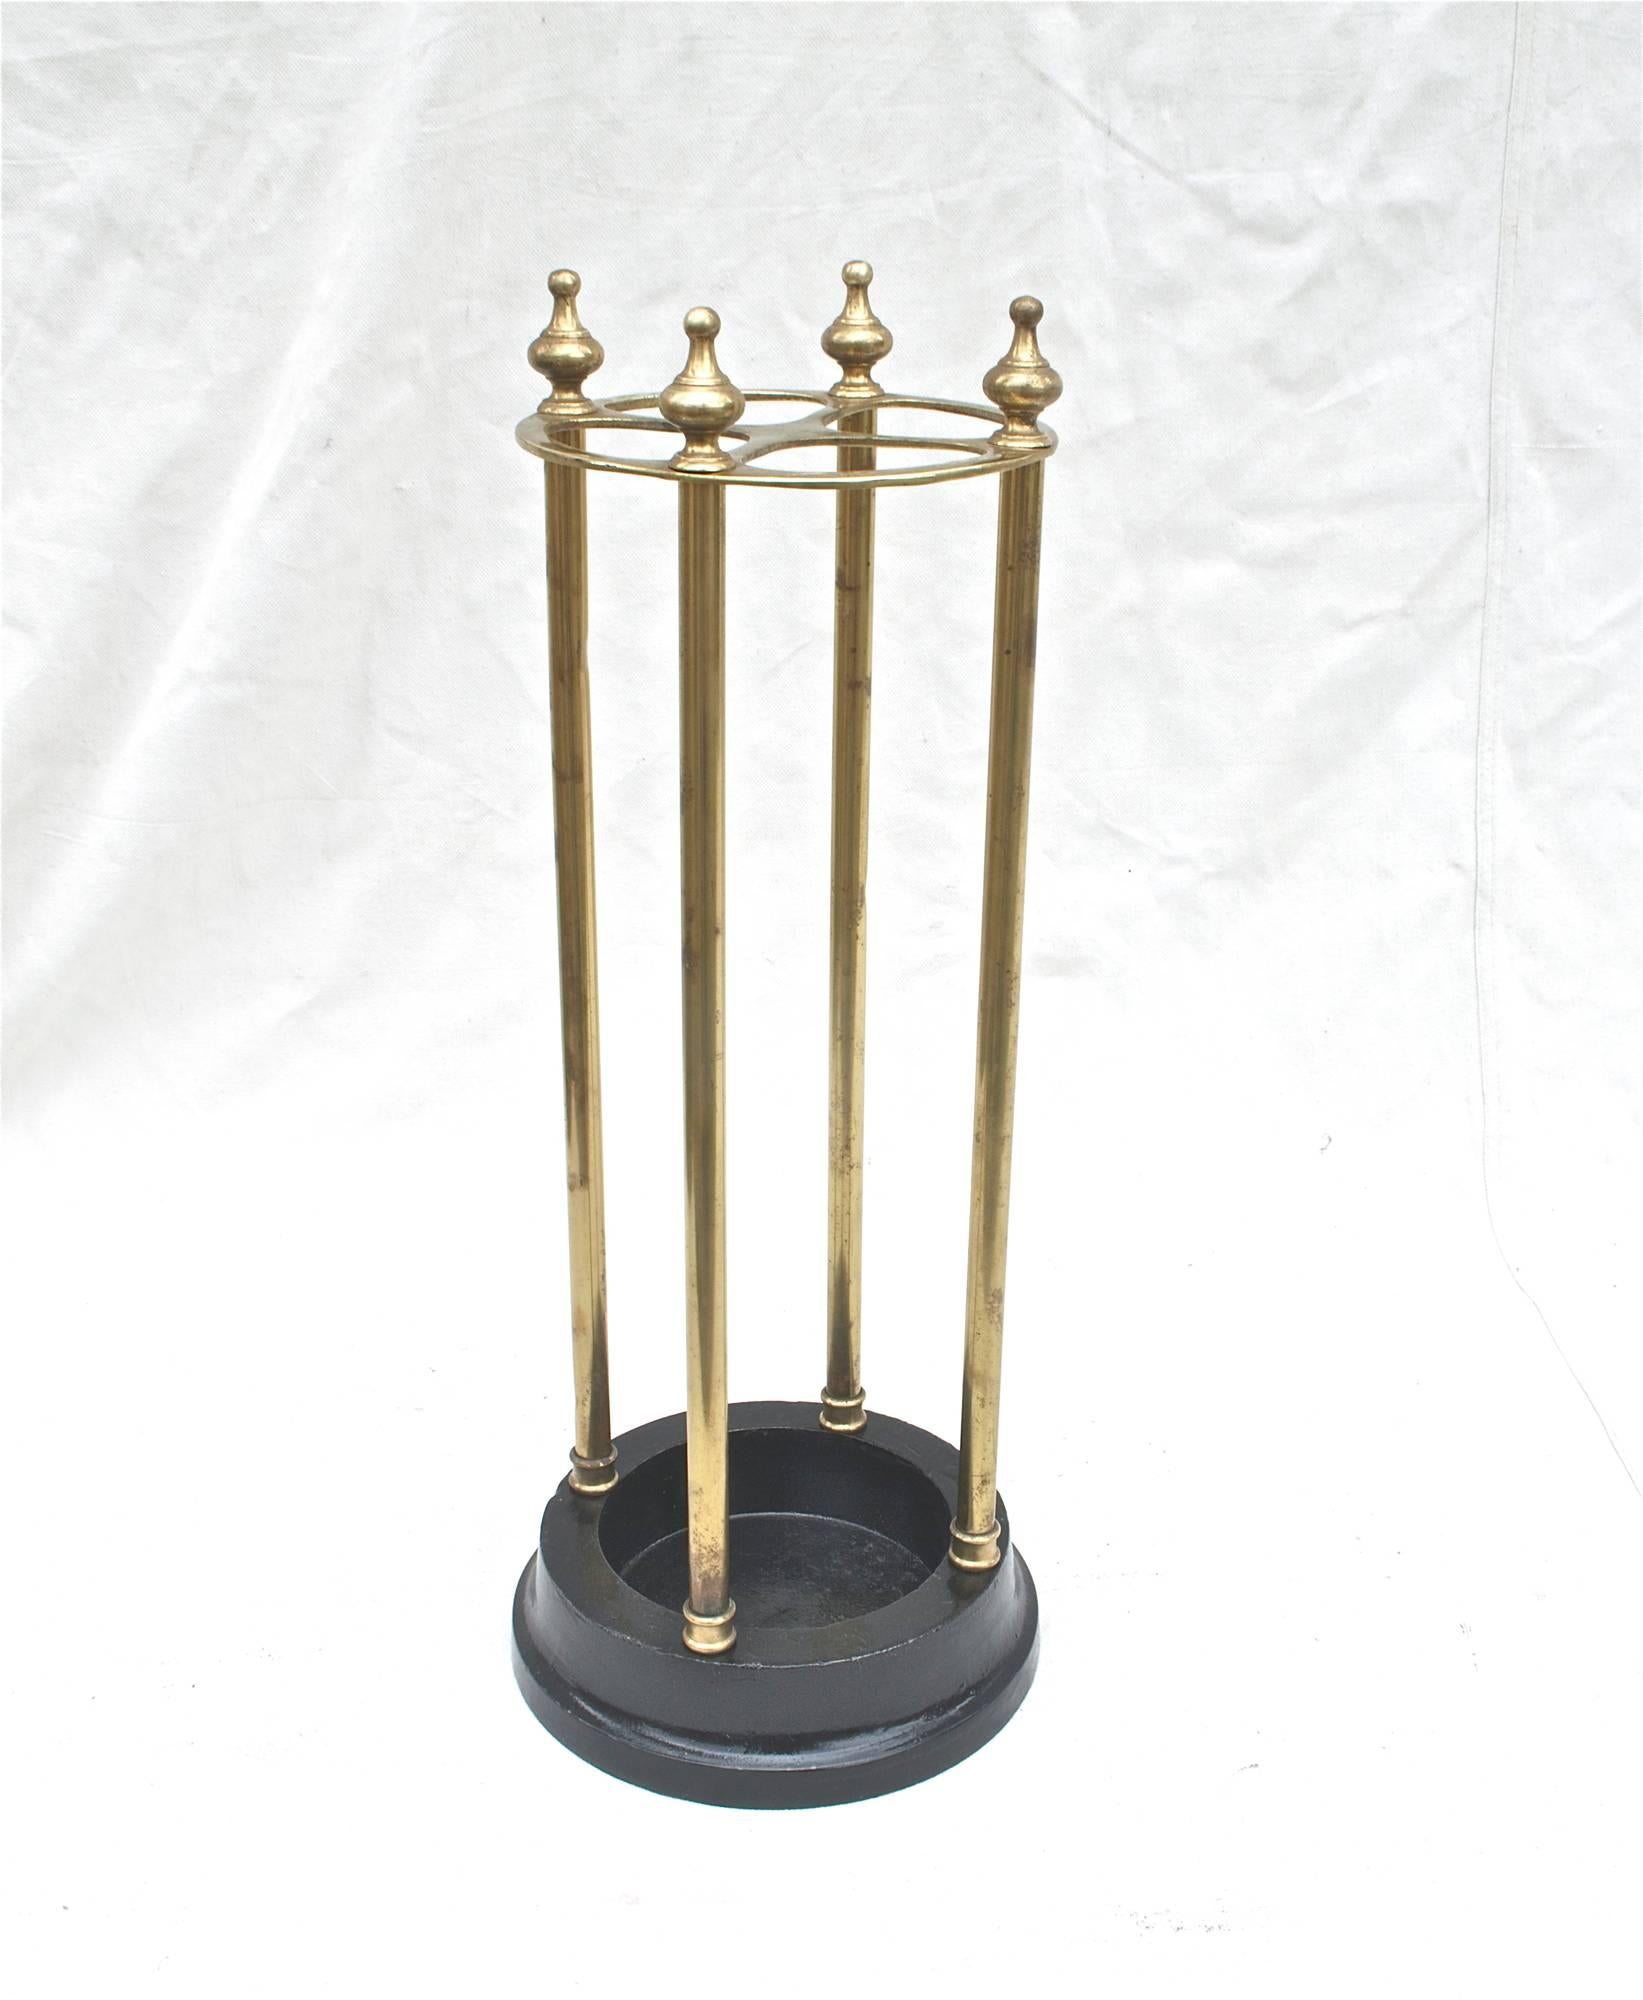 A simple and elegant umbrella / cane stand. Brass and cast iron. Made in England. Fill it with your fine collection and it will serve you well for years to come.